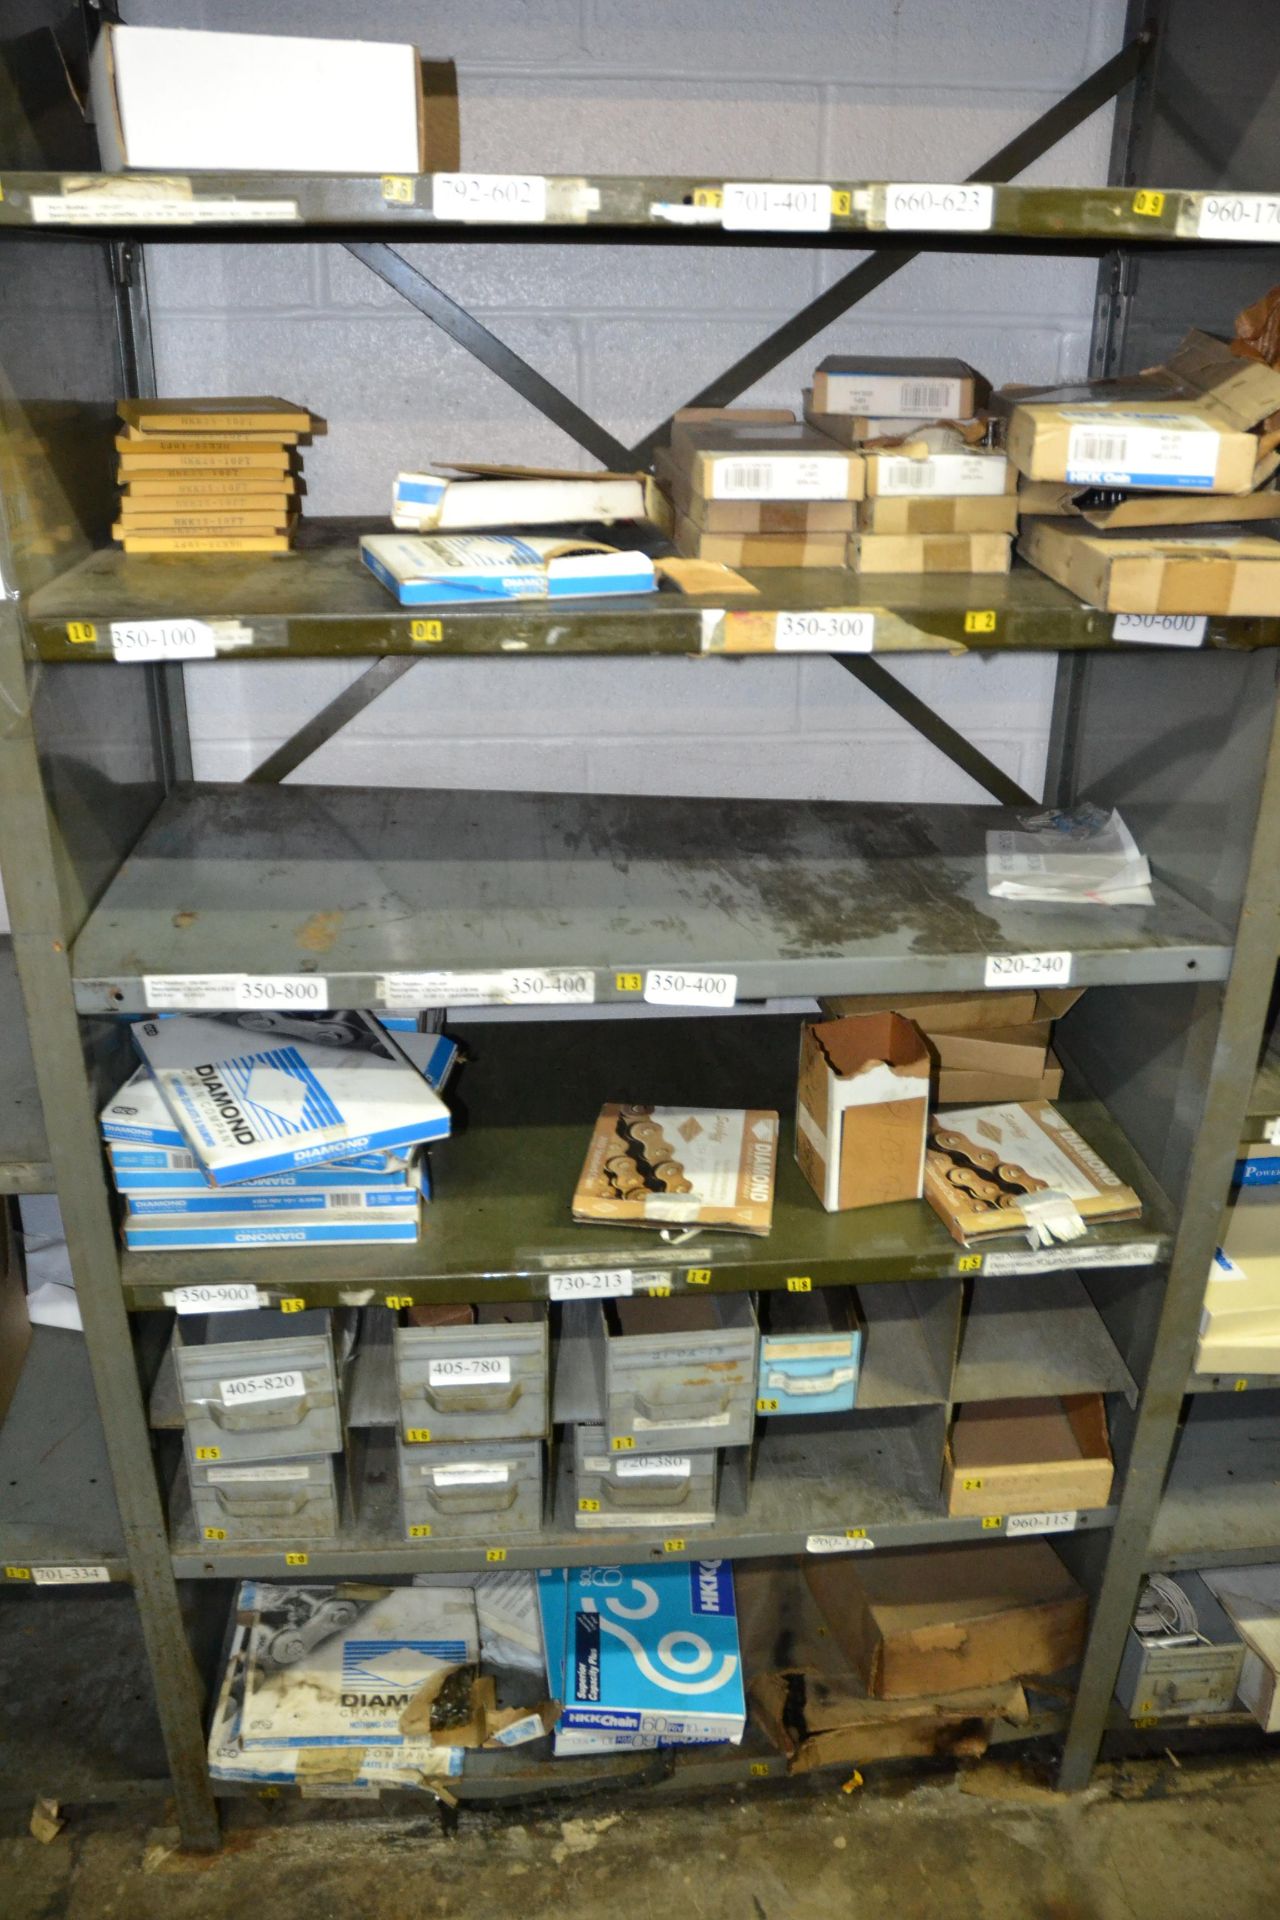 LOT - CONTENTS OF PARTS ON SHELVING